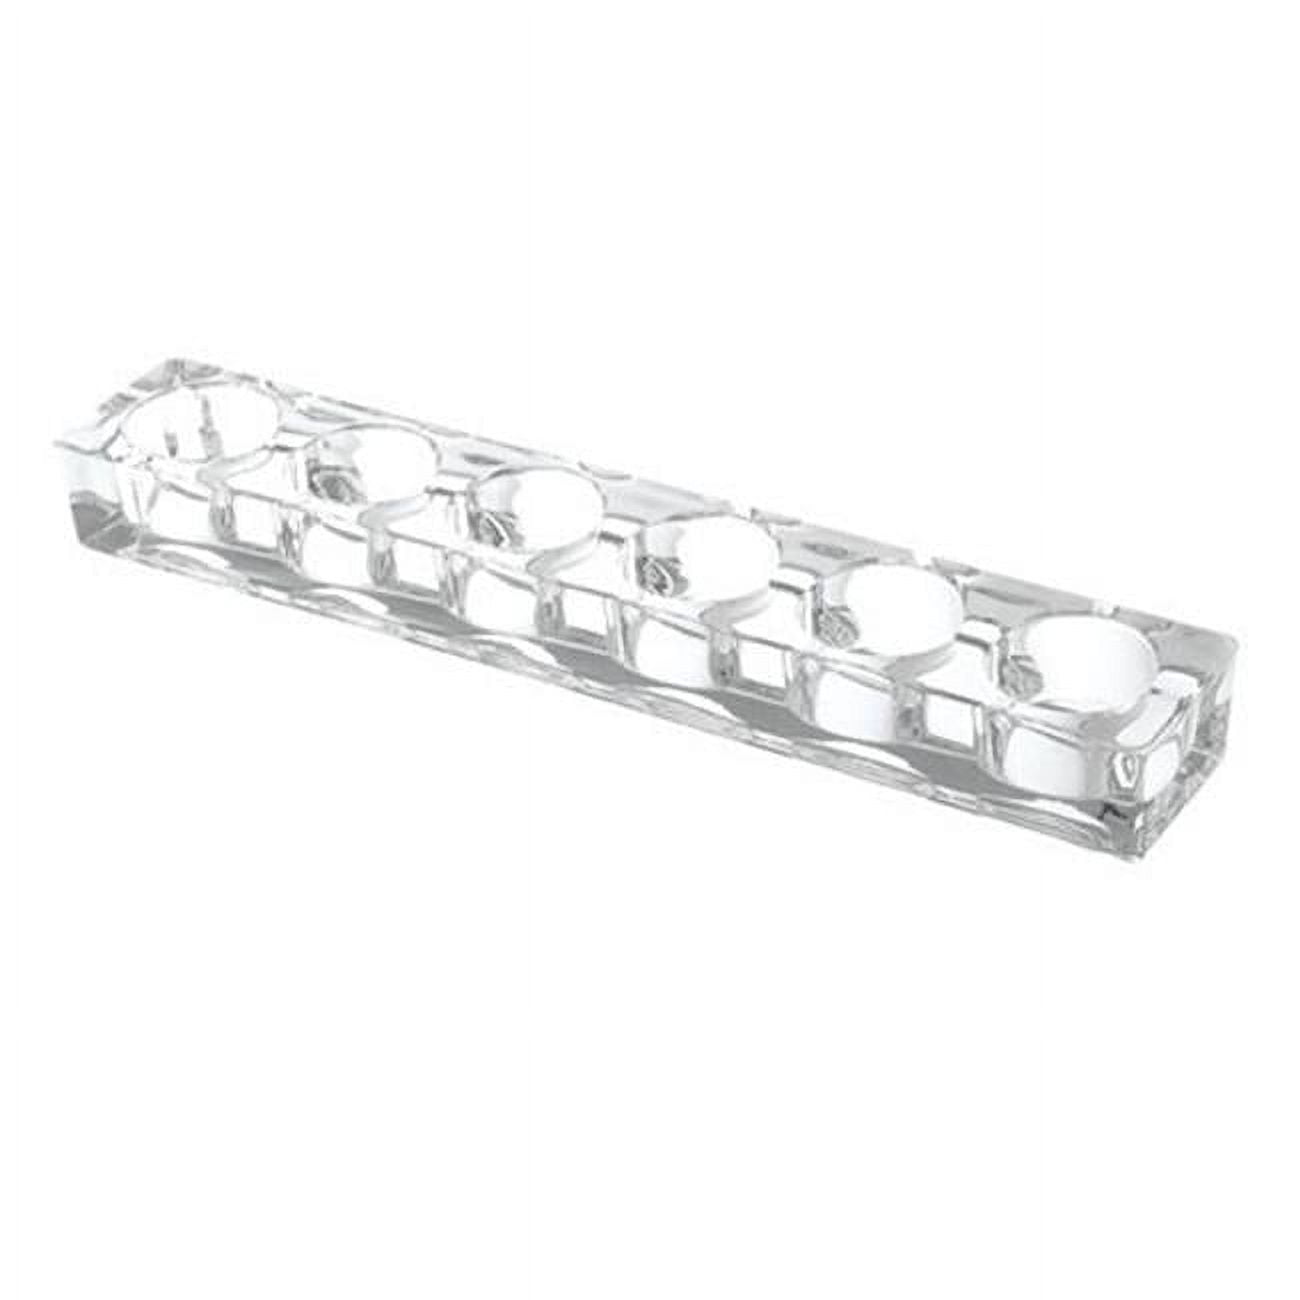 1.5 X 2.5 X 13 In. Glass Tealight Holder, Clear